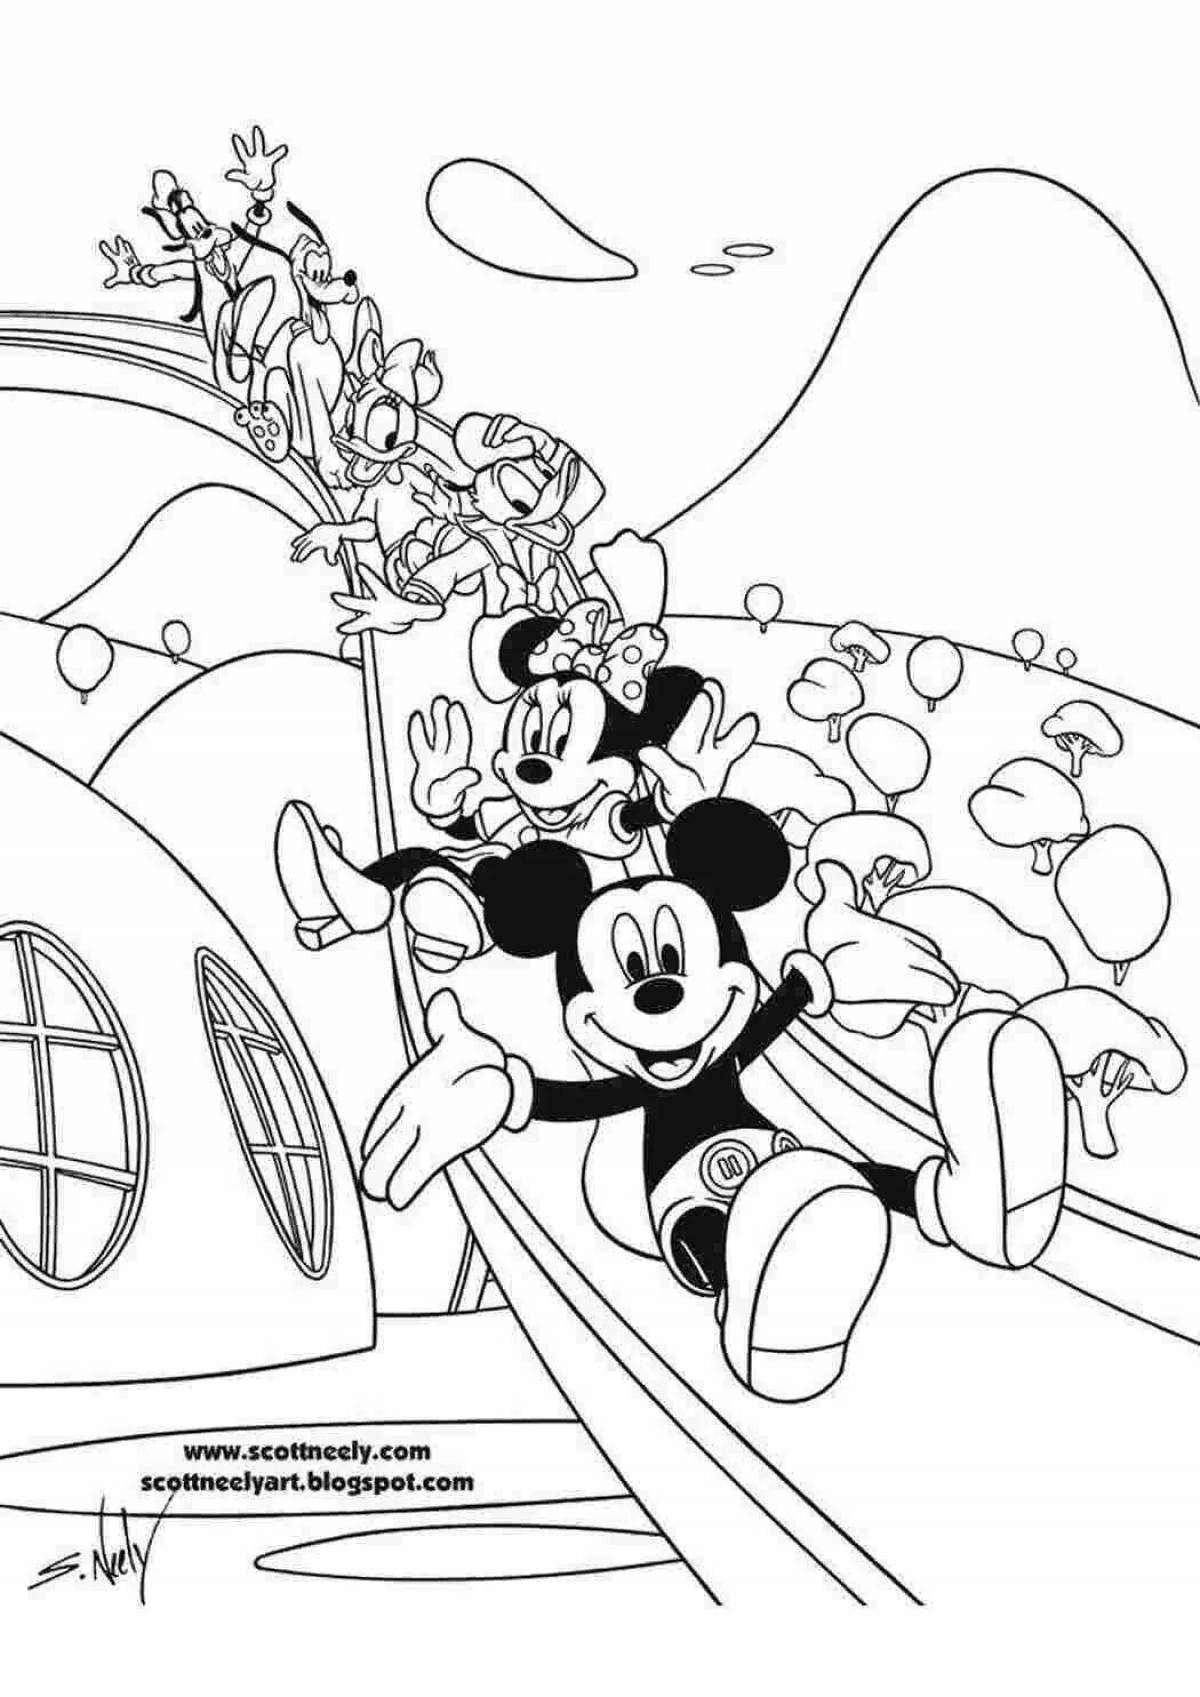 Coloring page joyful mickey mouse